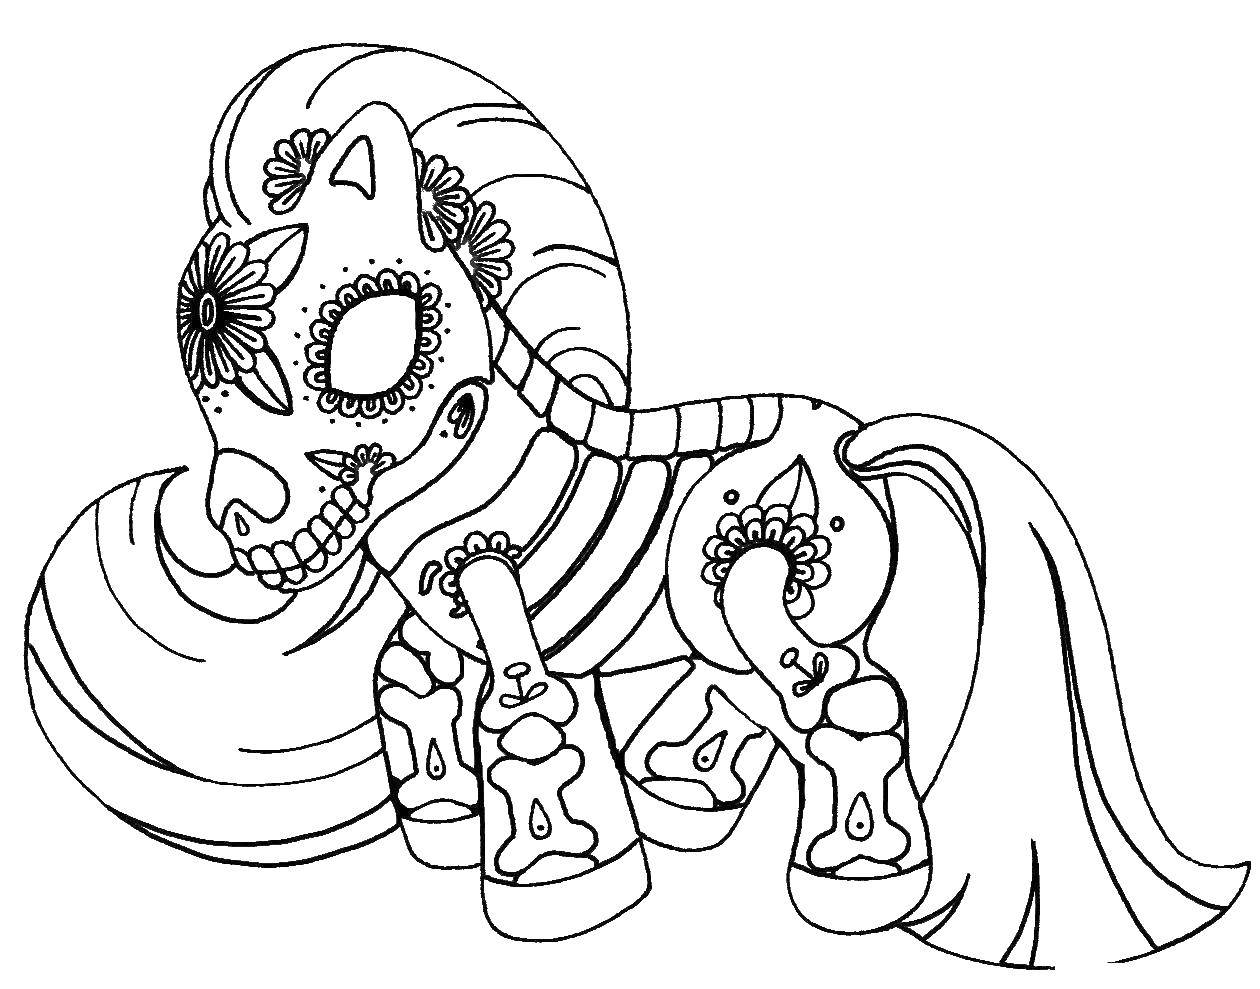 Coloring Patterned pony from my little pony . Category patterns. Tags:  Pony, My little pony .